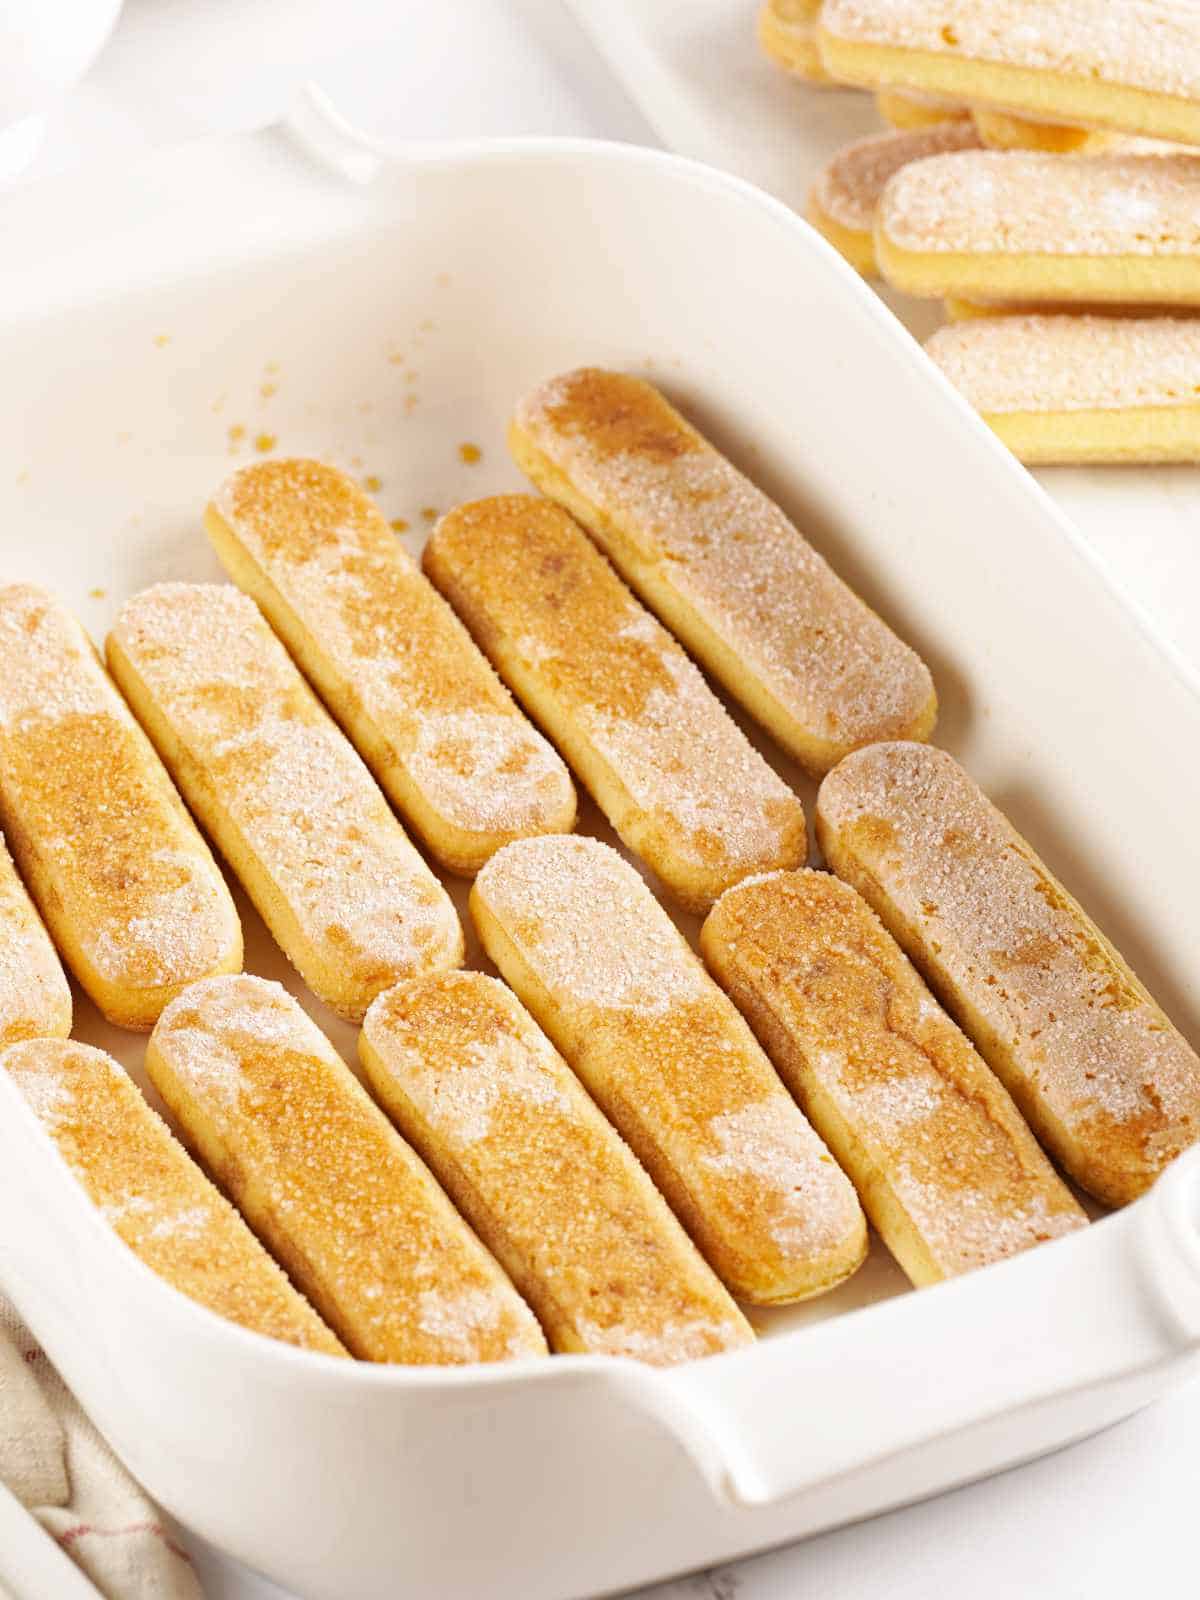 ladyfinger cookies as bottom layer in a casserole dish, drizzled with espresso.